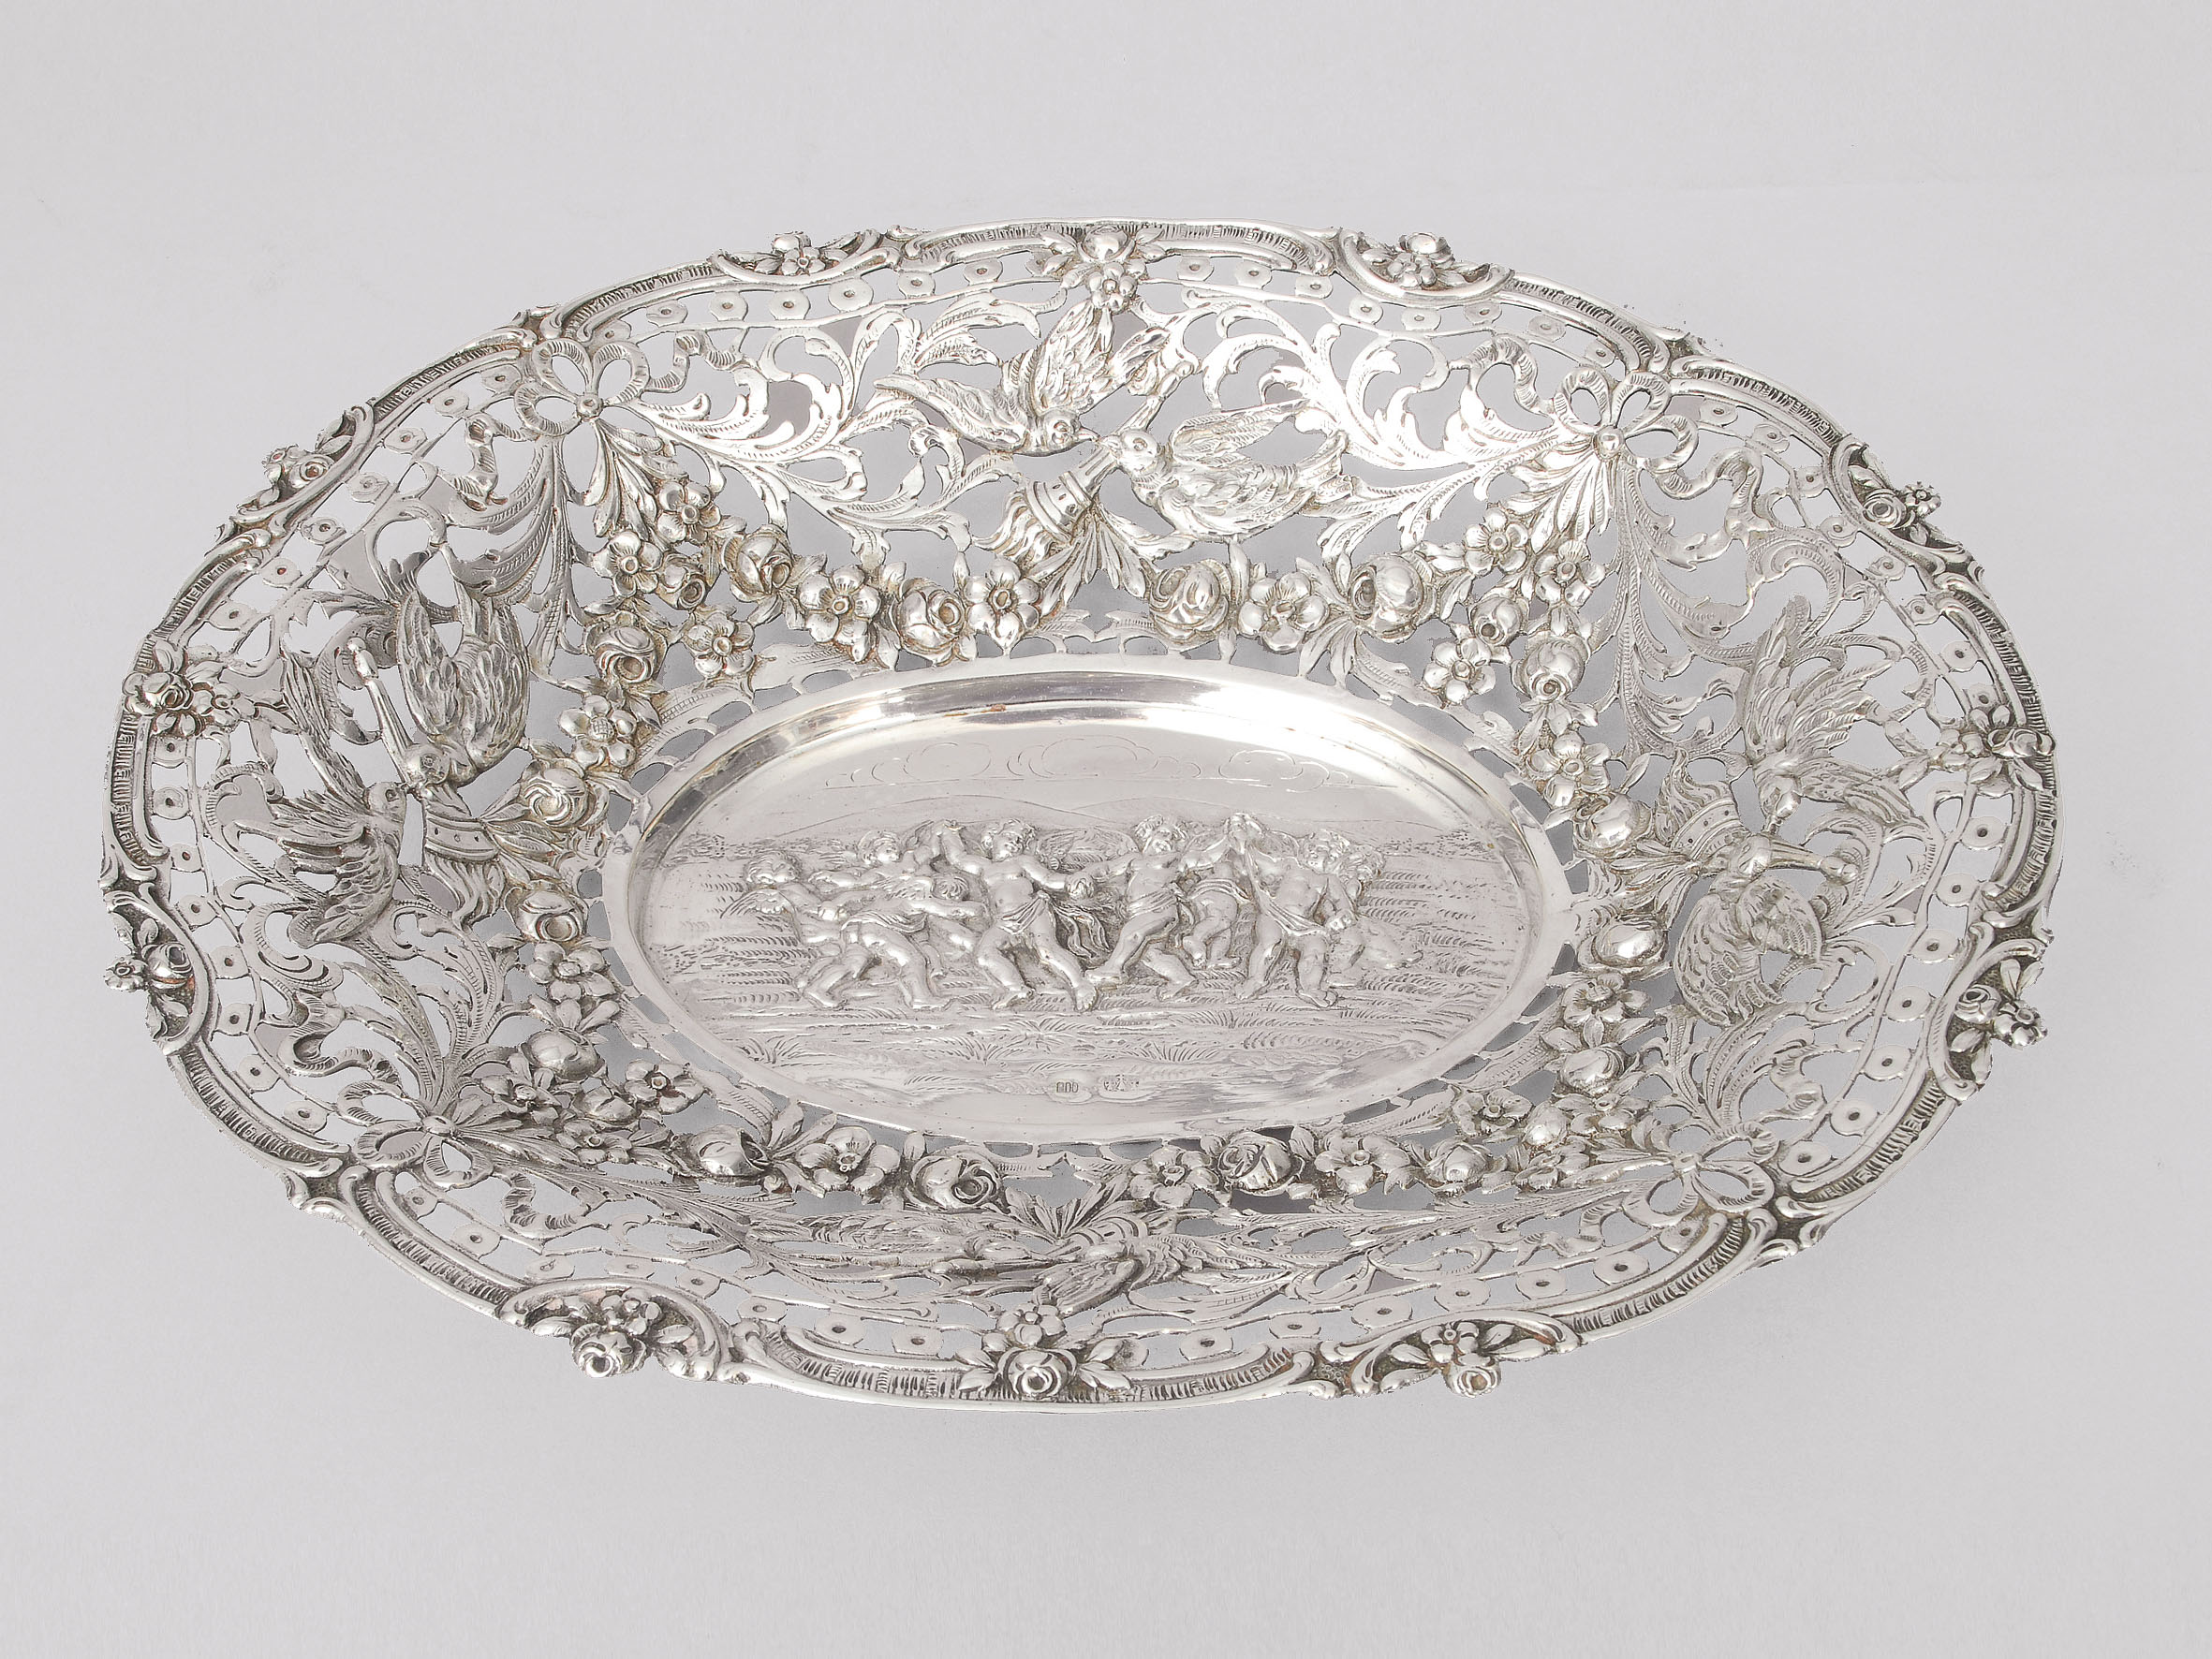 A small bowl with ornaments of dancing putti